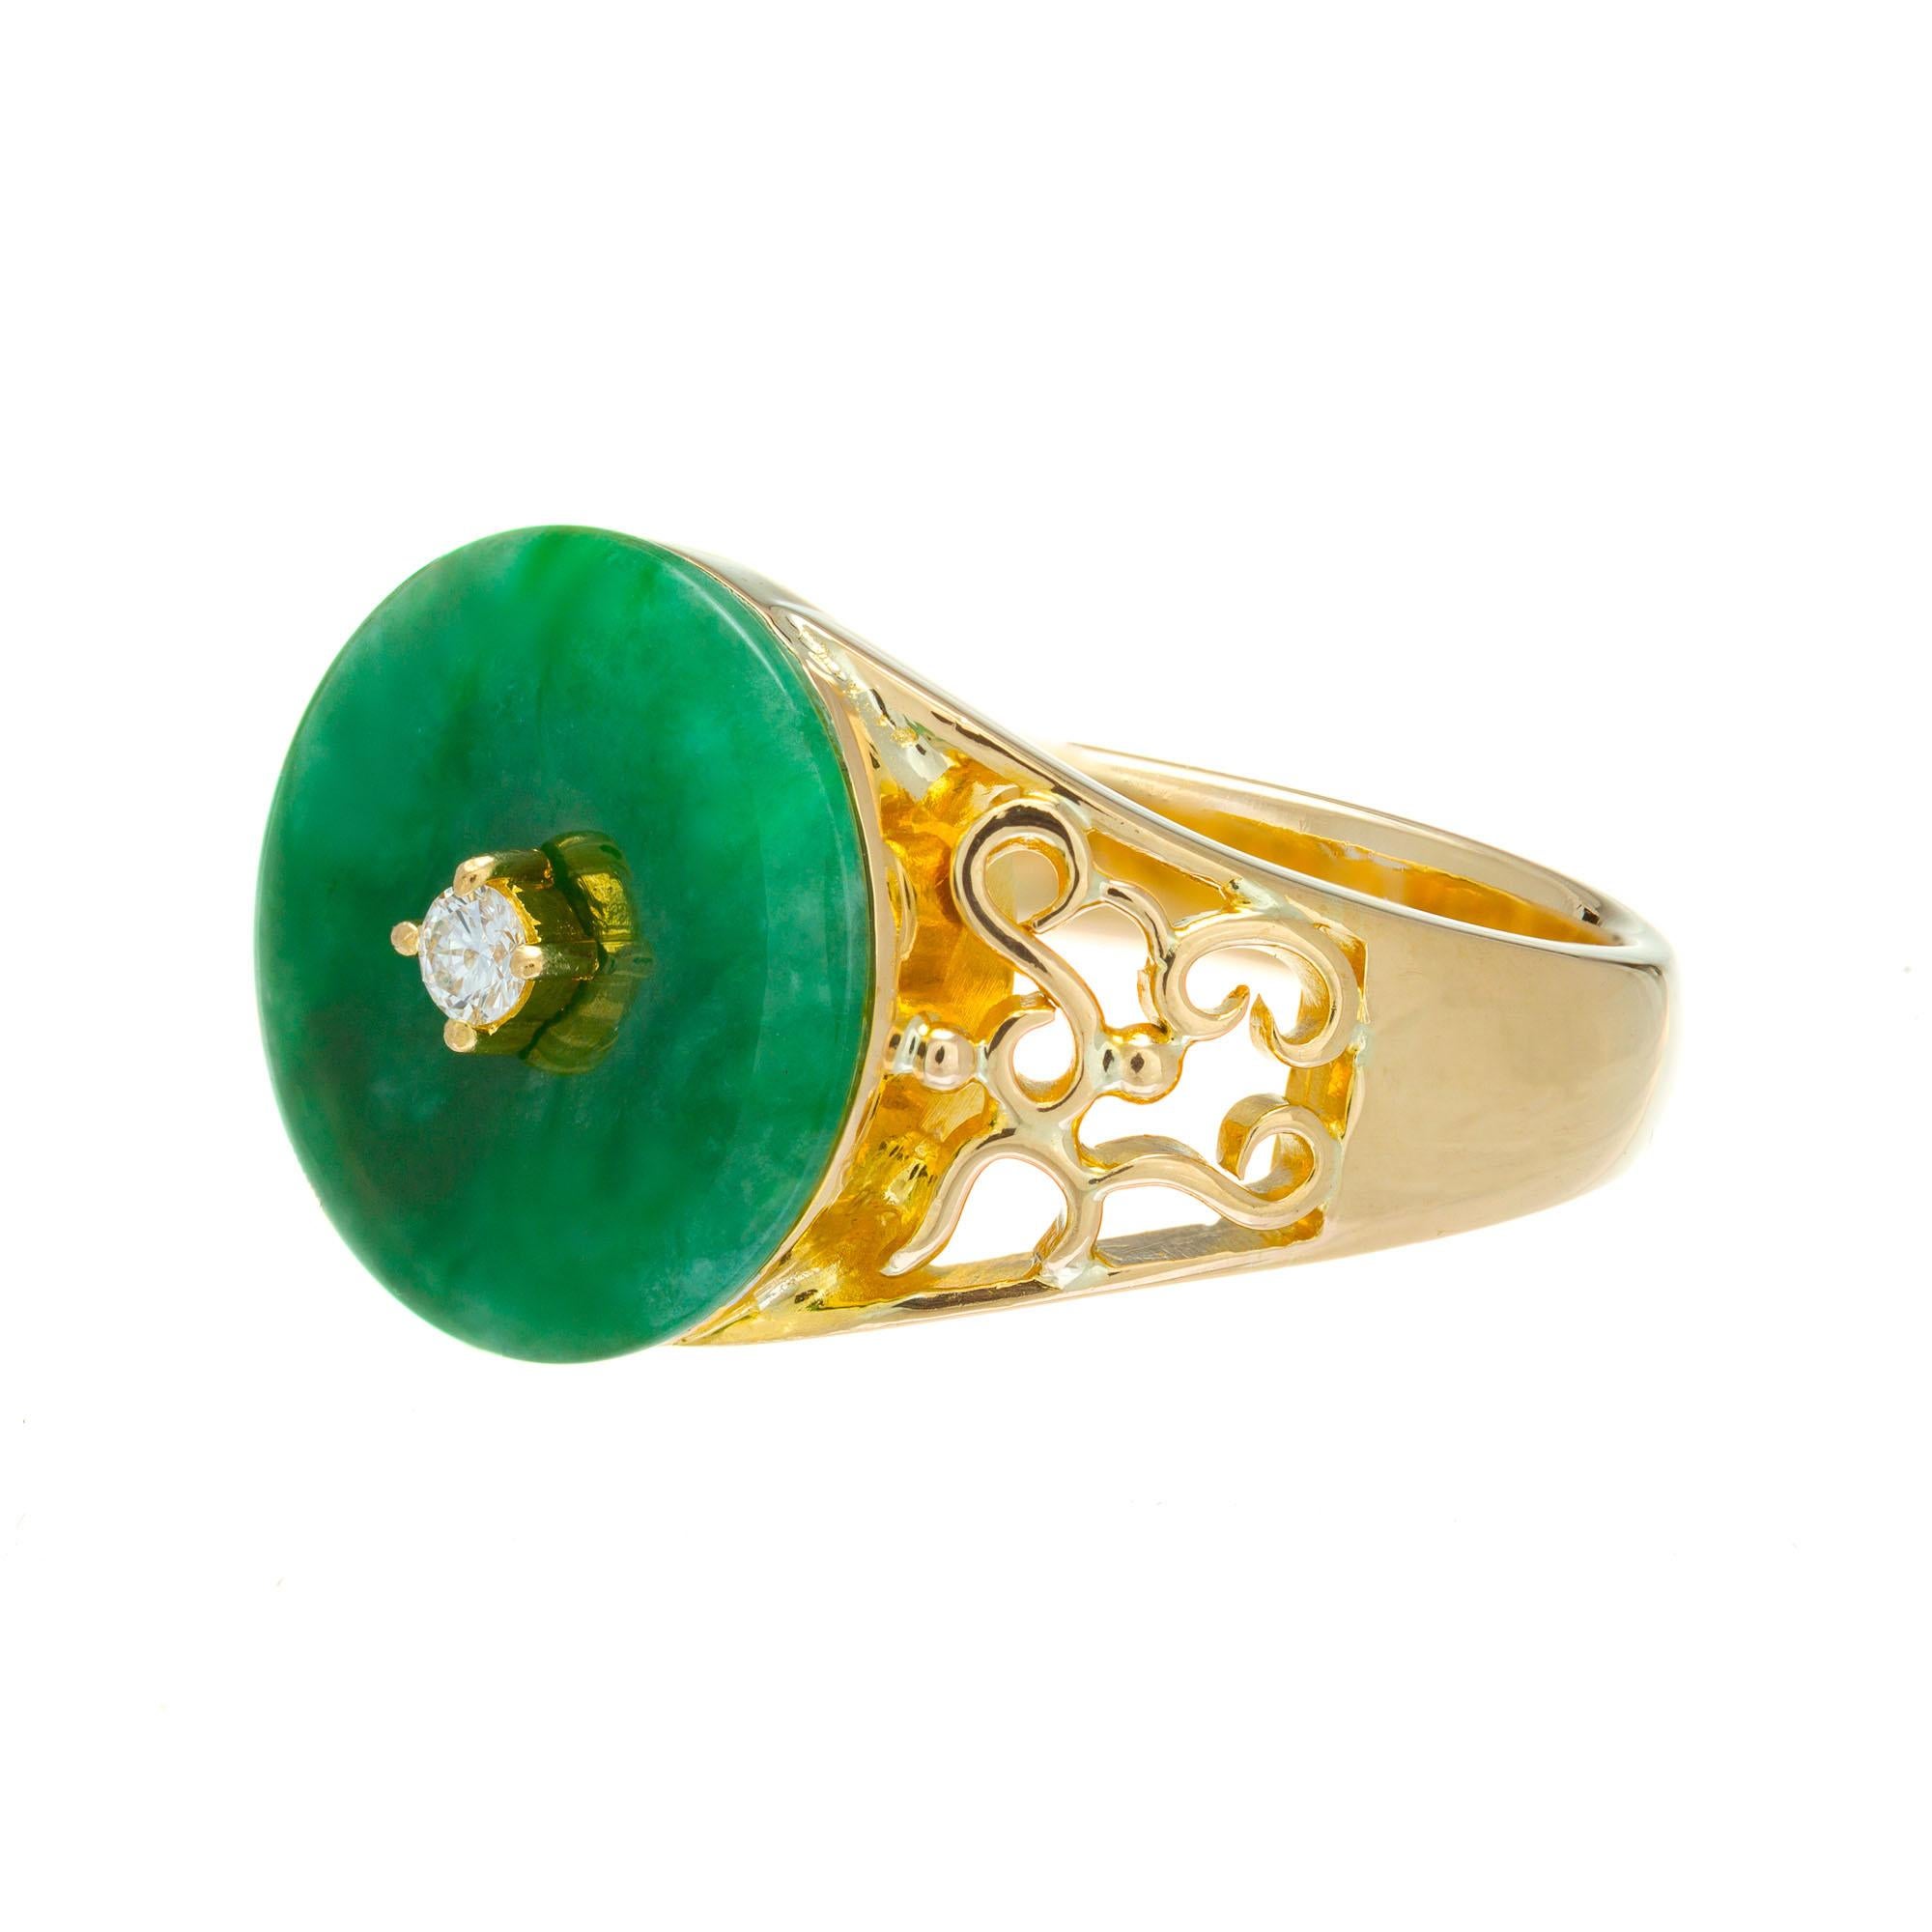 GIA Certified Jadeite Jade translucent mottled green pierced disc ring in 20k yellow gold with a round diamond center.

1 round disc pierced mottled green jadeite jade 13.34mm GIA Certificate # 2201372867
1 round brilliant cut diamond H VS2, approx.